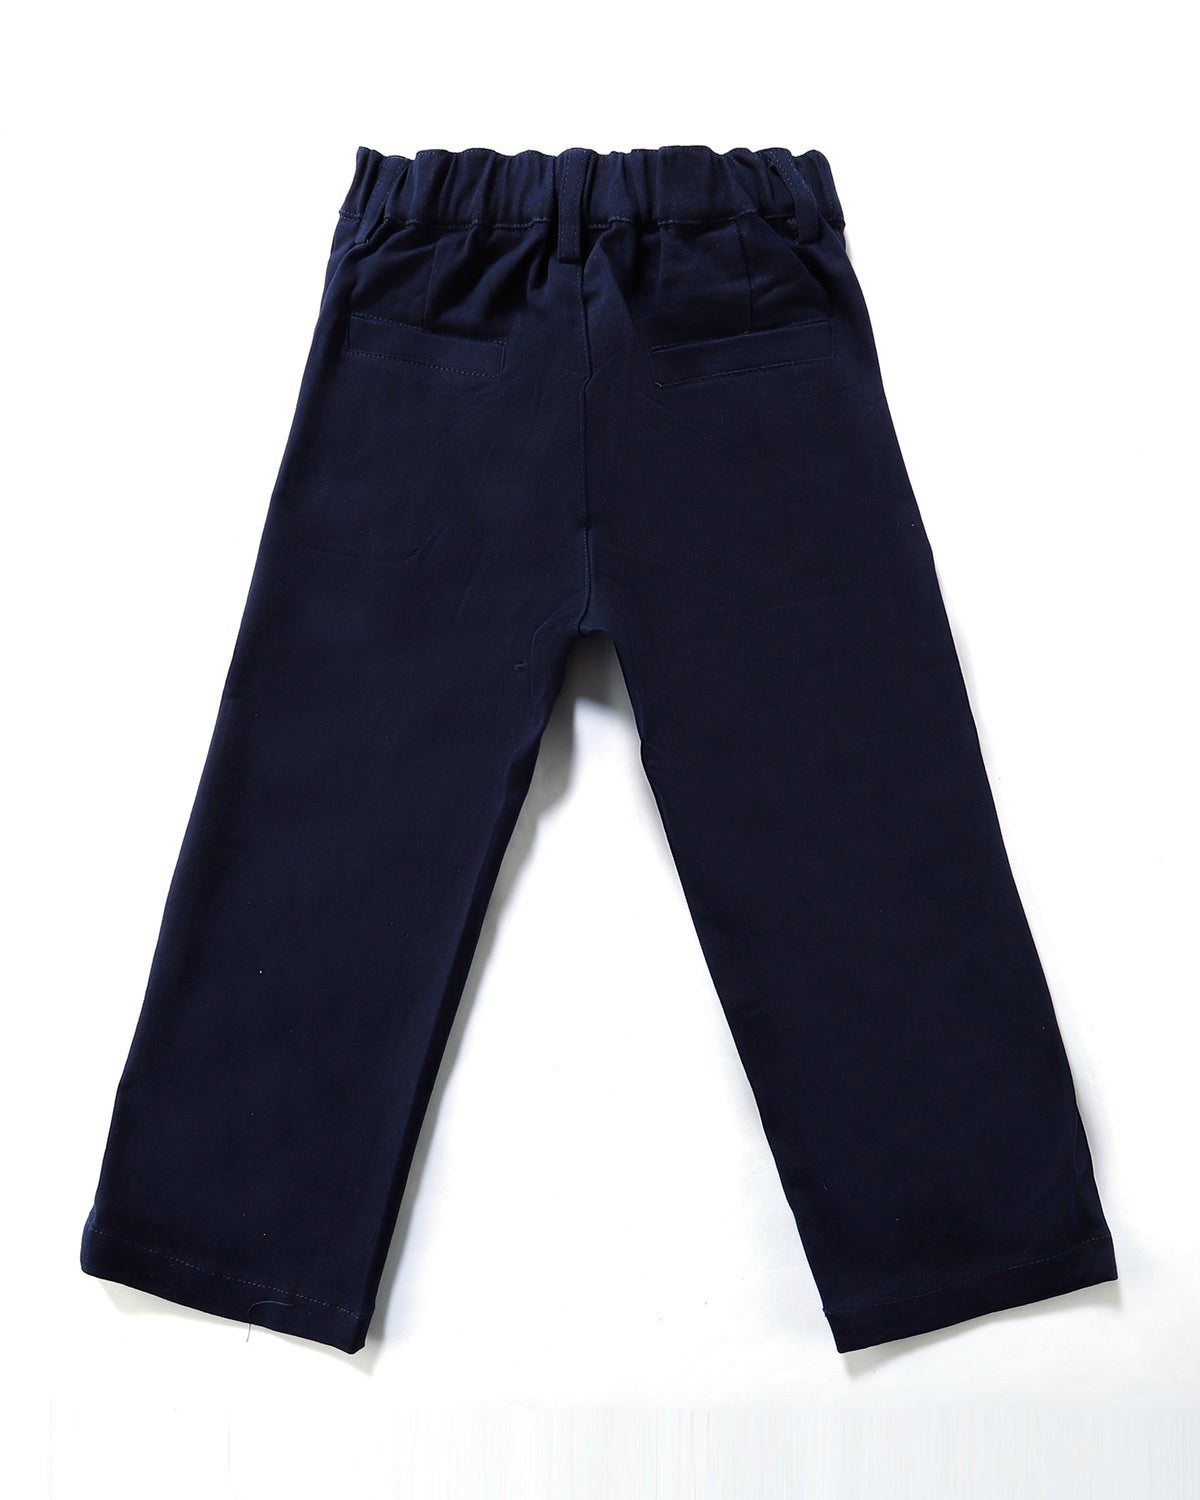 Signature Chino in Navy Back